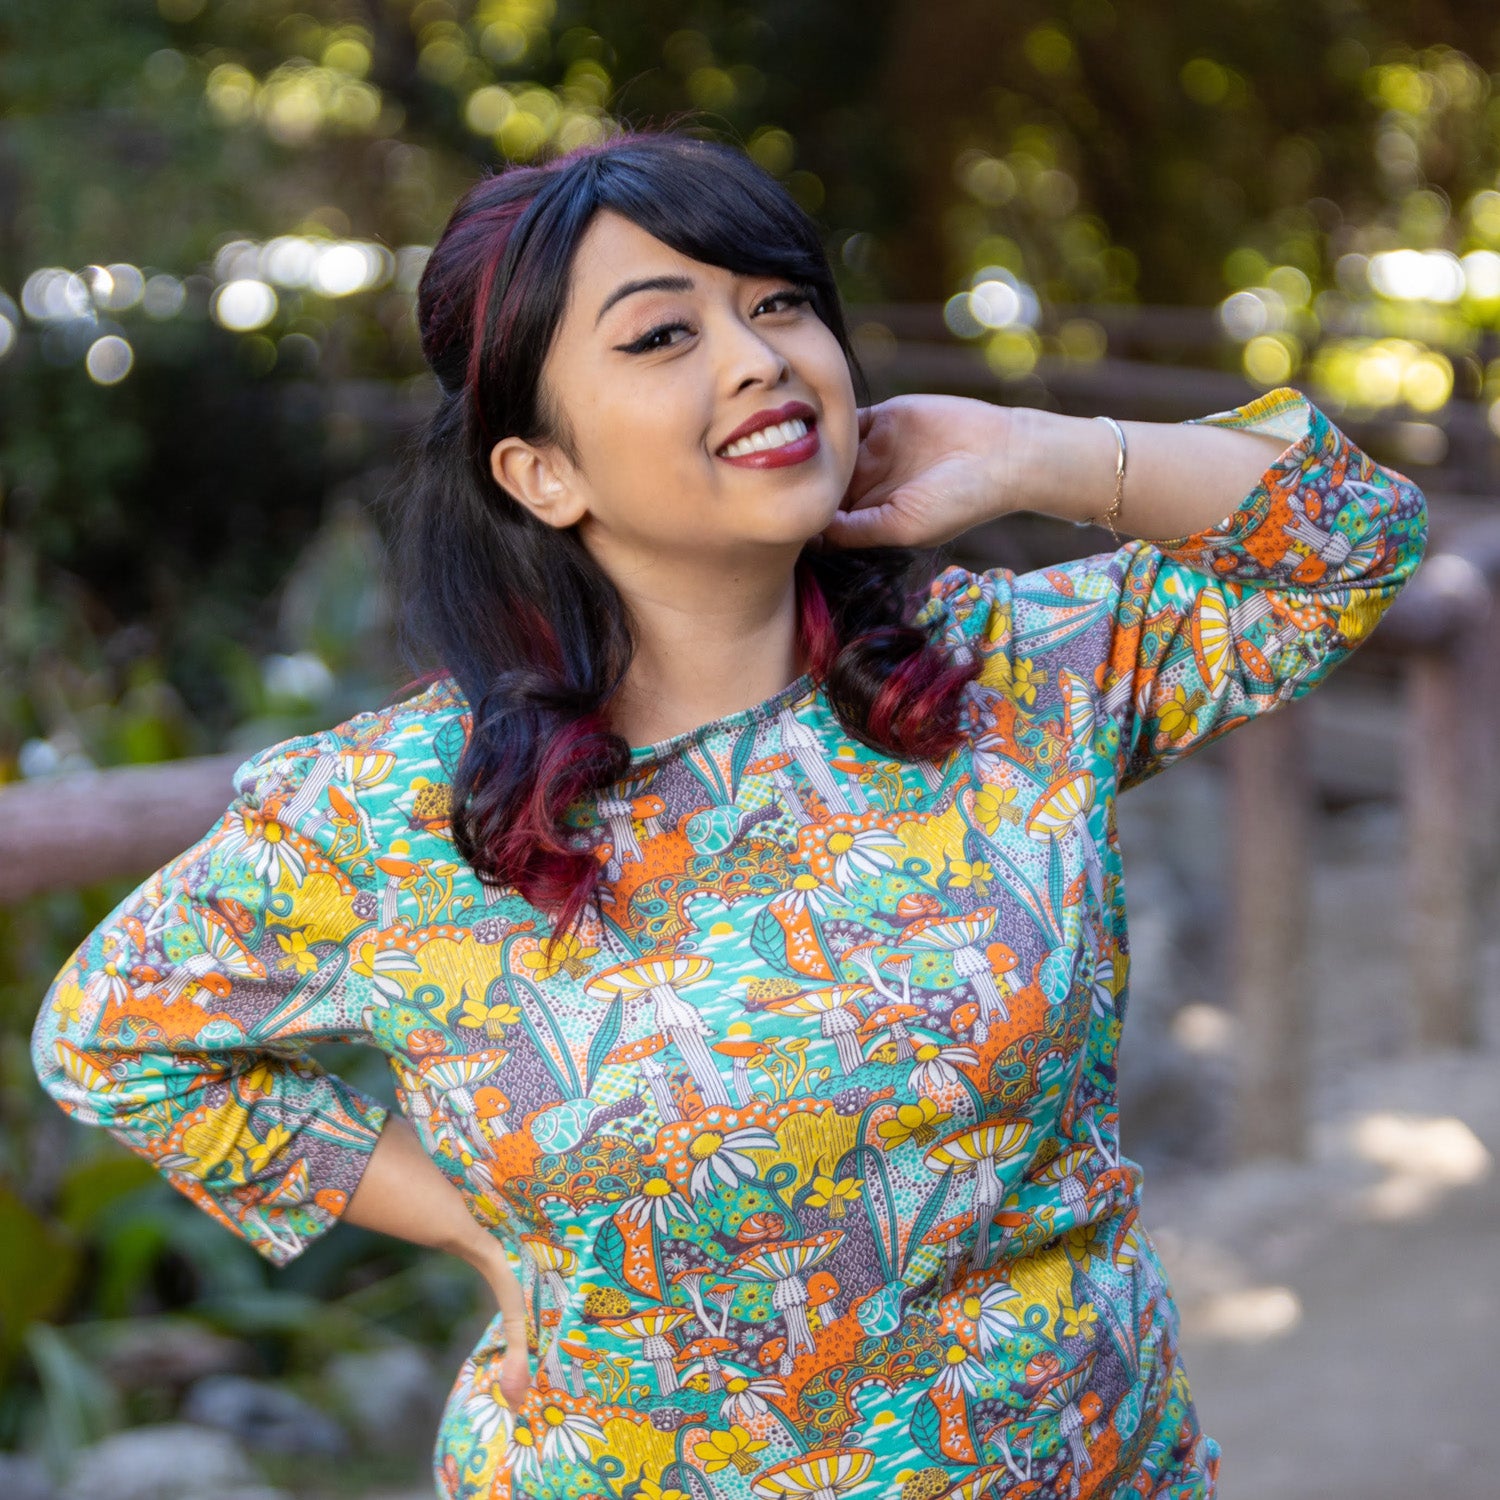 Model wearing 3/4 sleeve shirt featuring colorful fantasy landscape and mushrooms